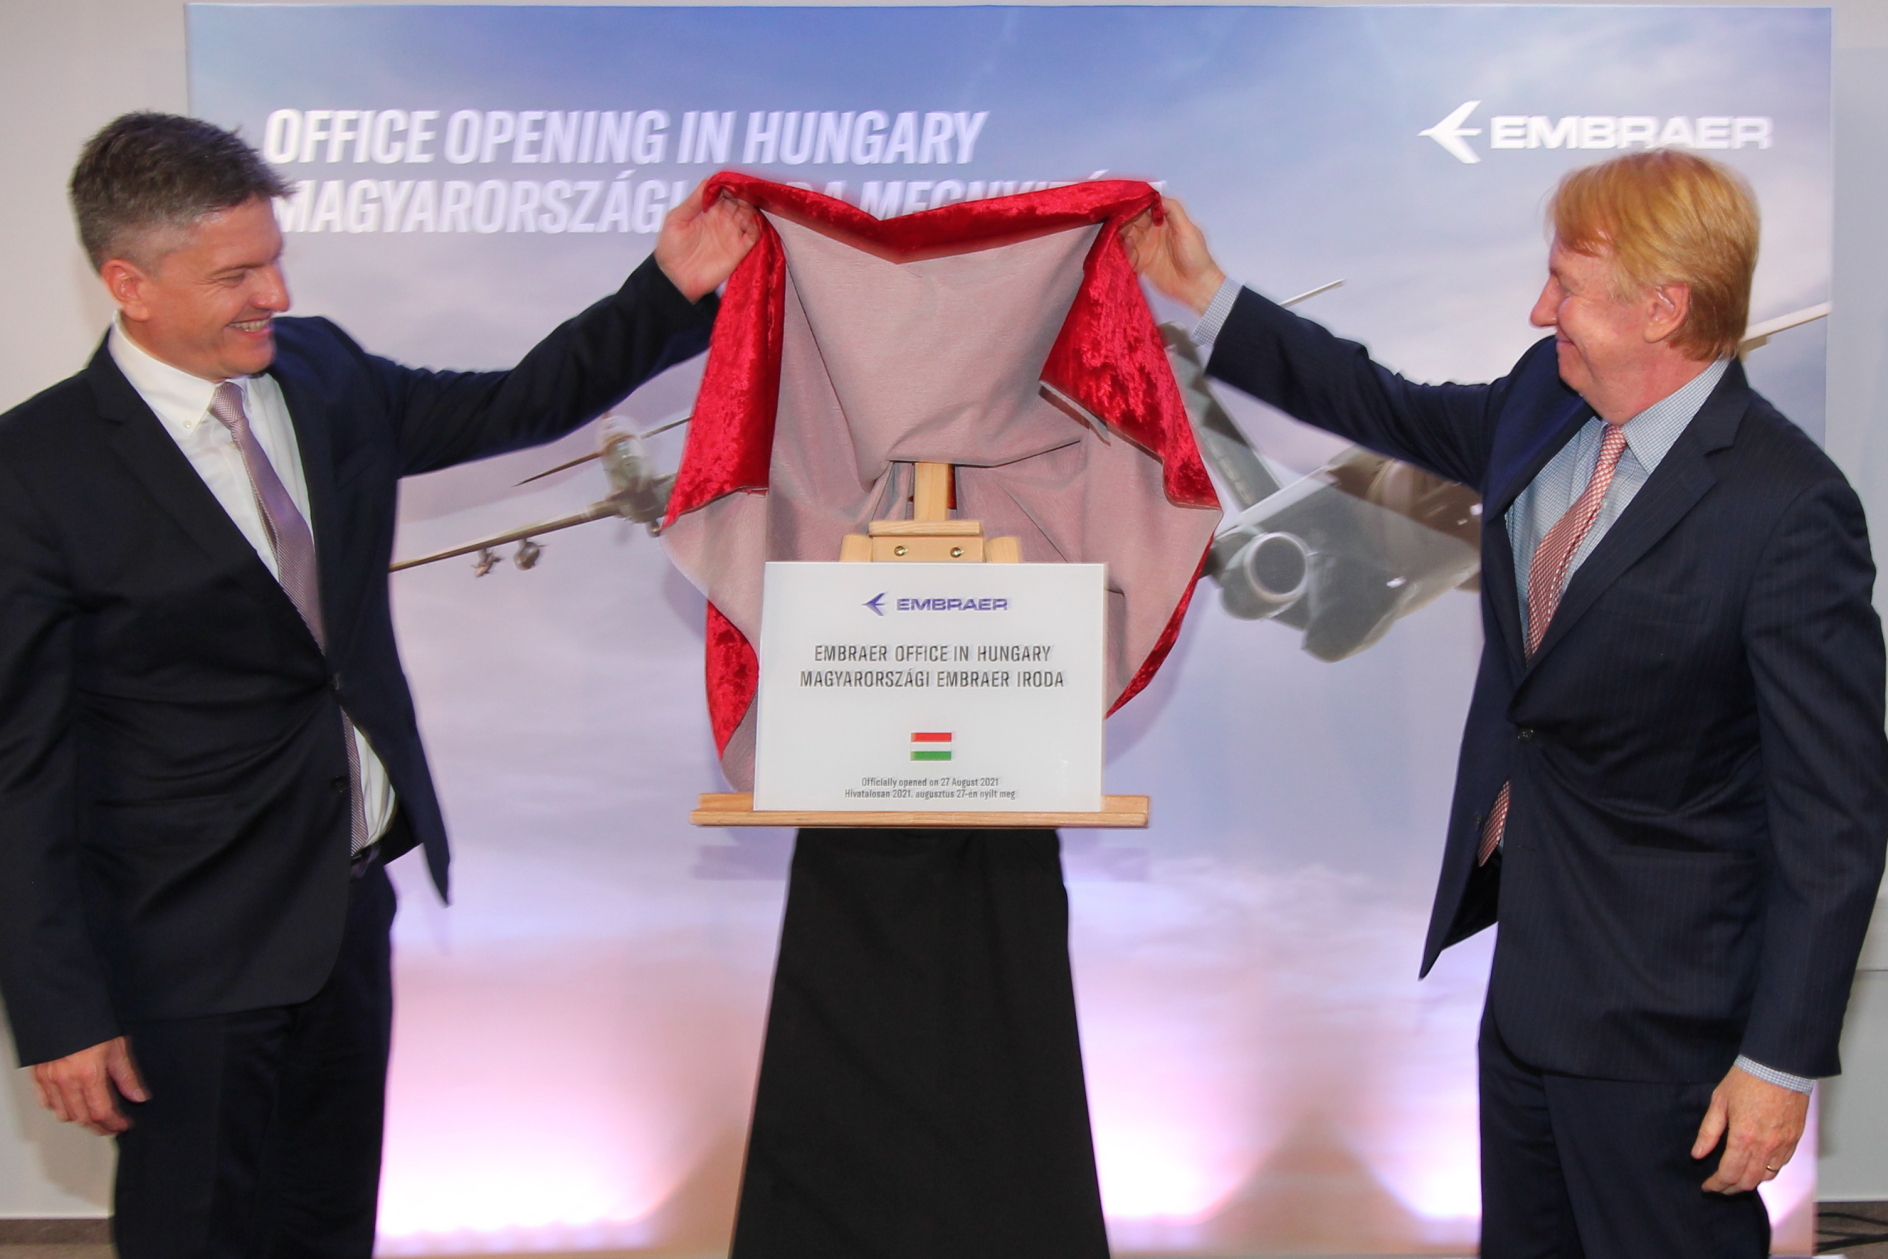 Embraer opens office in Budapest, Hungary. Click to enlarge.